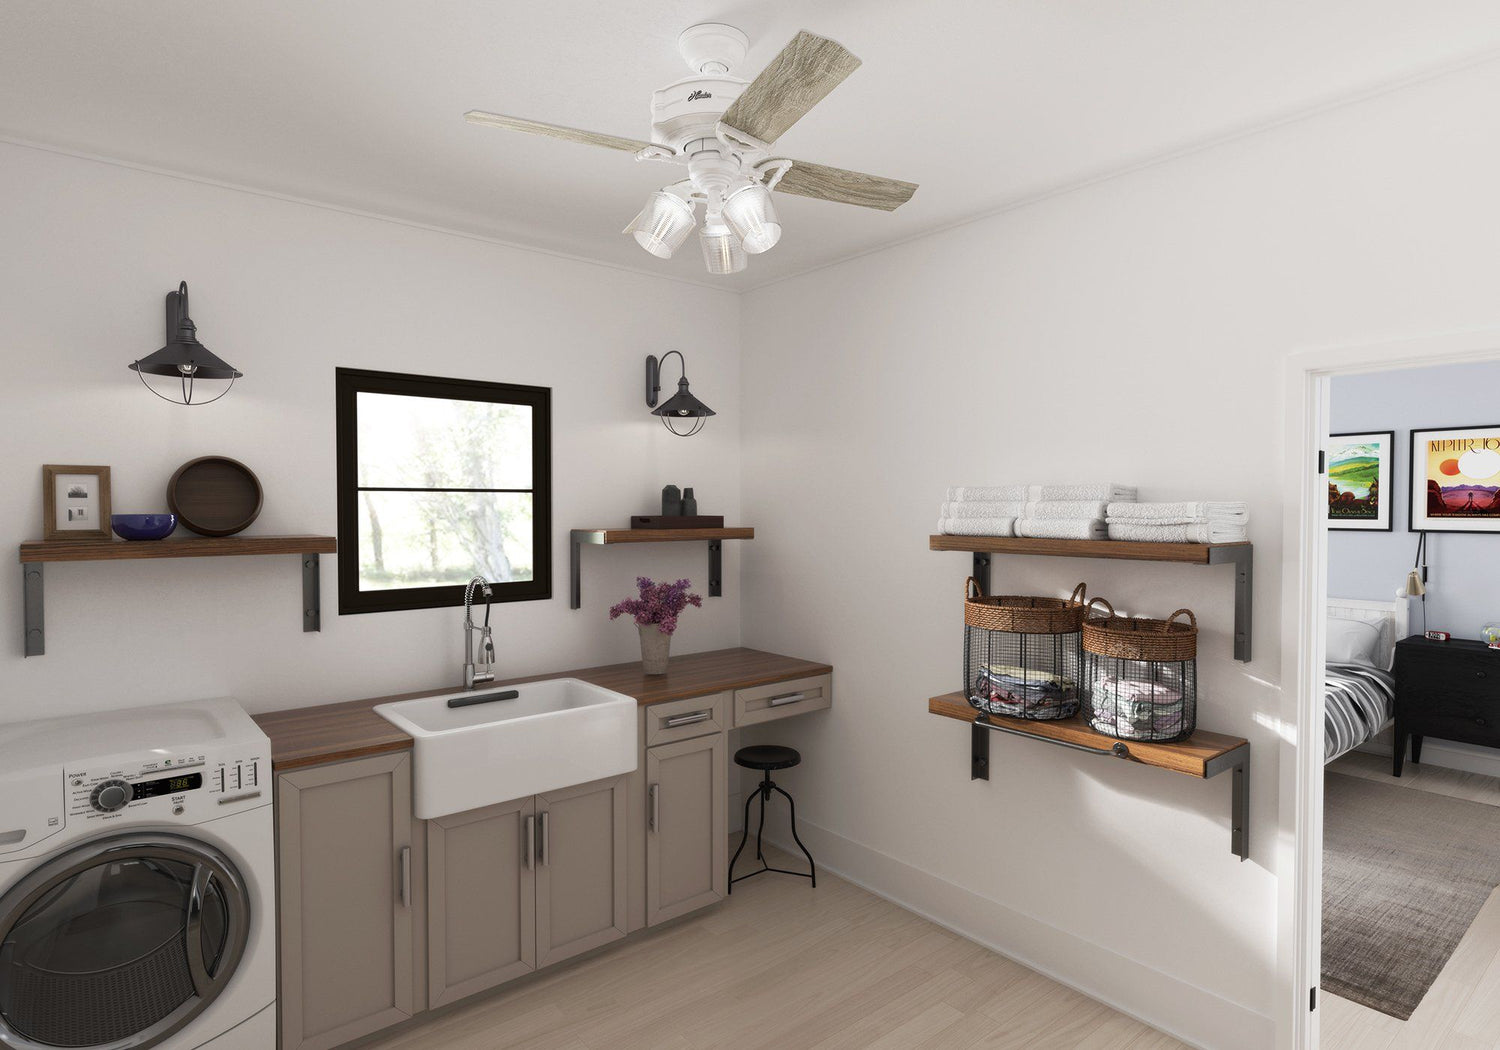 Our favorite spaces: The modern laundry room